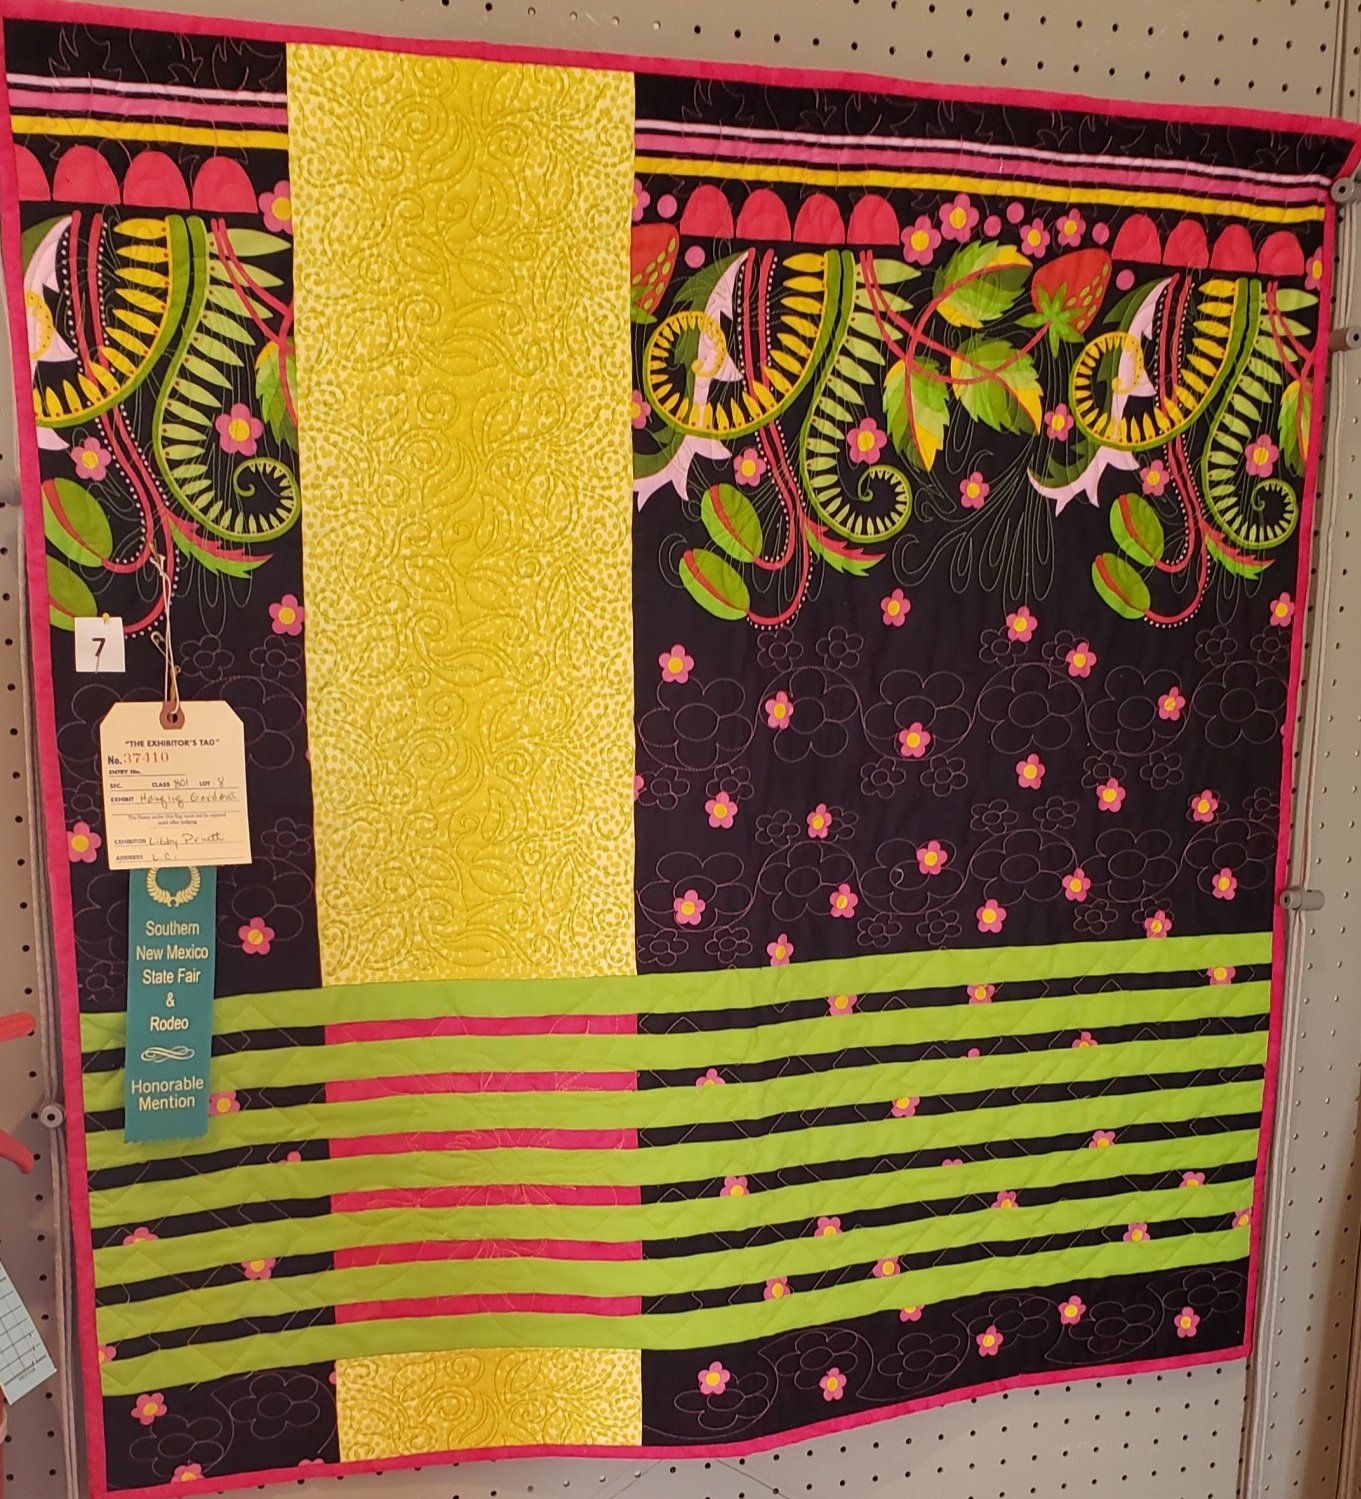 "Hanging Gardens," is one of Mia Kalish’s favorites at the Southern New Mexico State Fair because she enjoys Jane Sassaman’s work. This quilt uses Sassaman fabric with coordinating colors and quilting motifs.